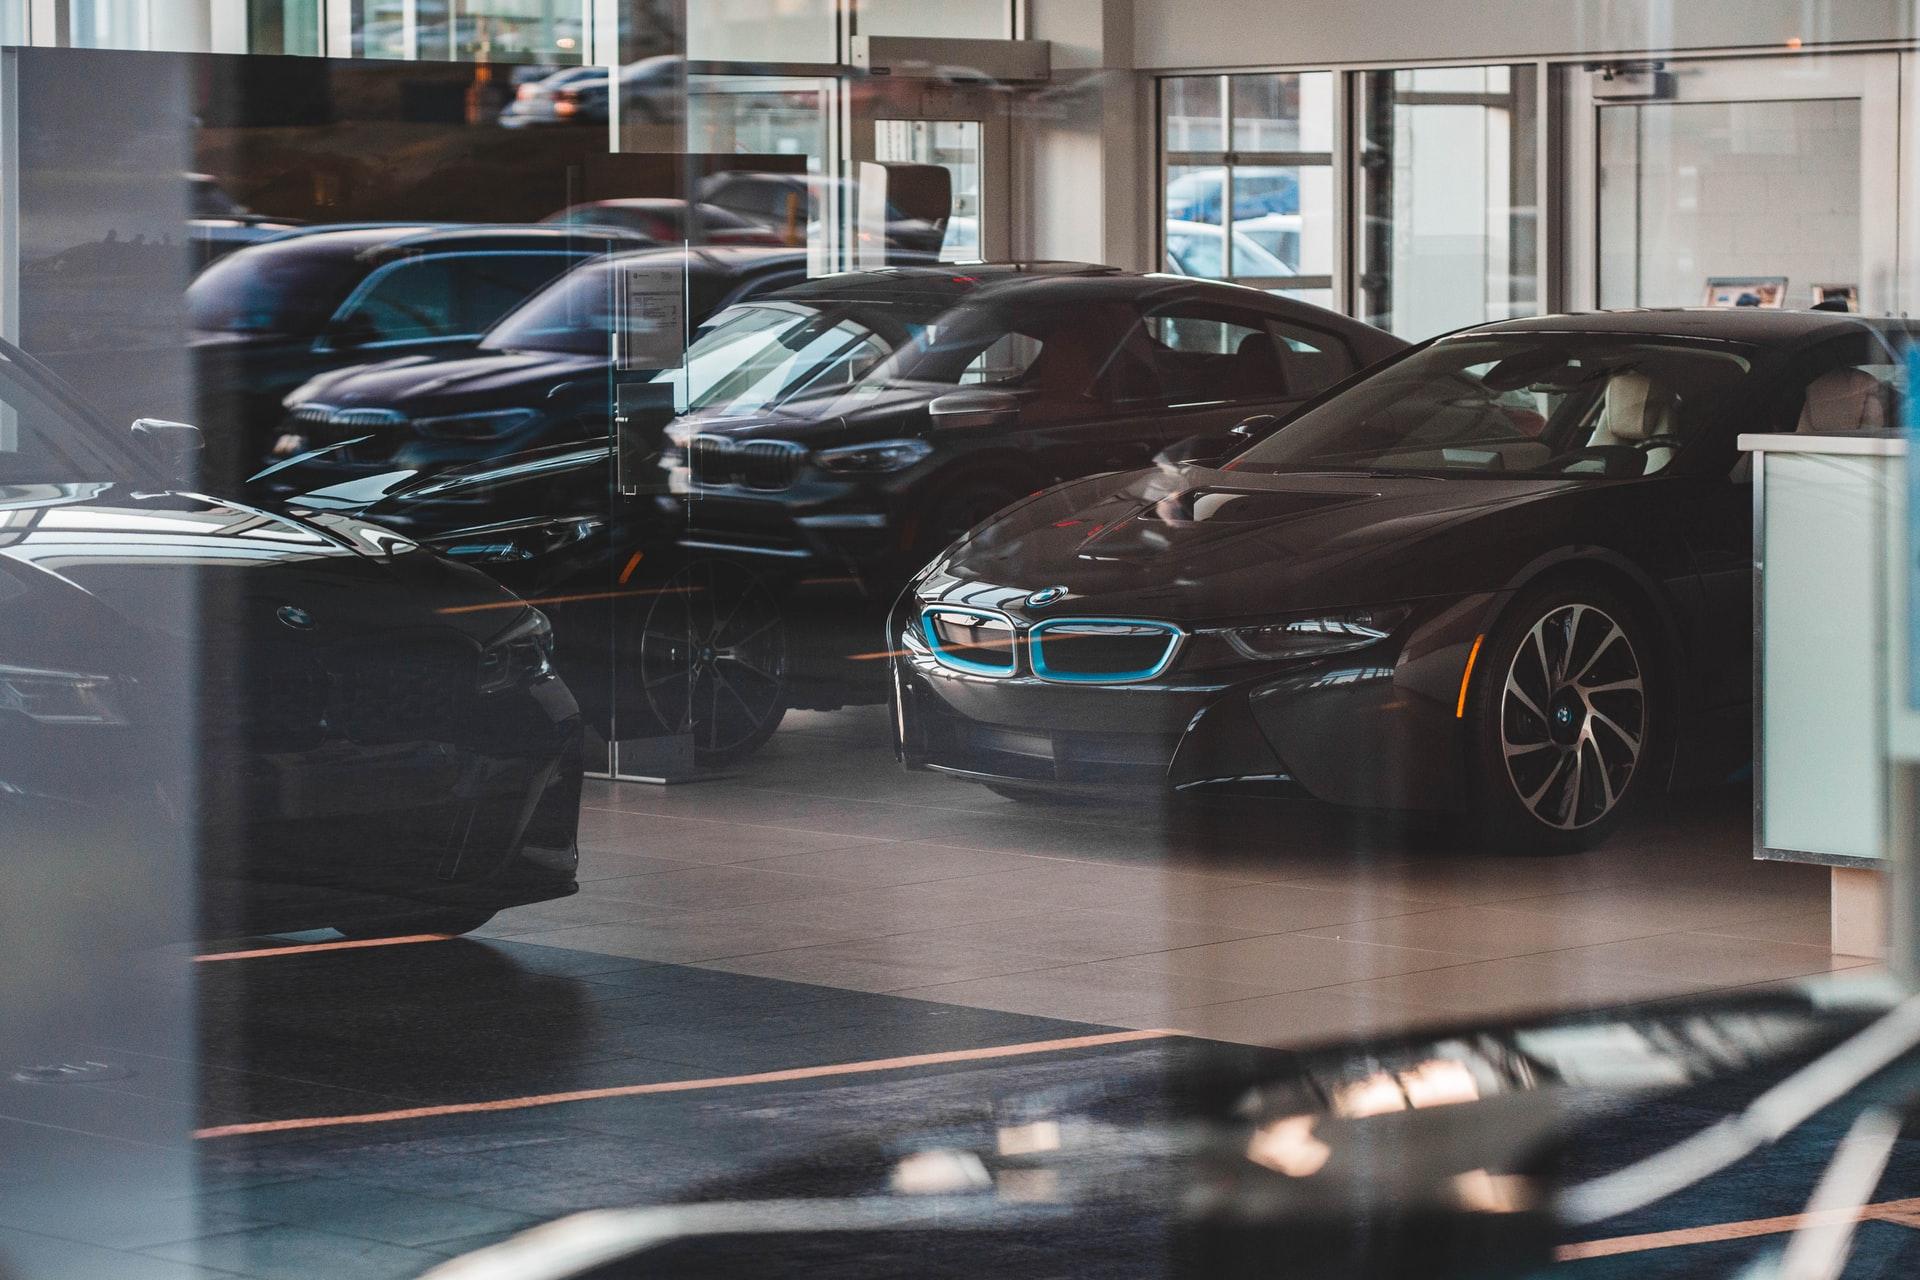 BMW luxury cars lined-up at a dealership.